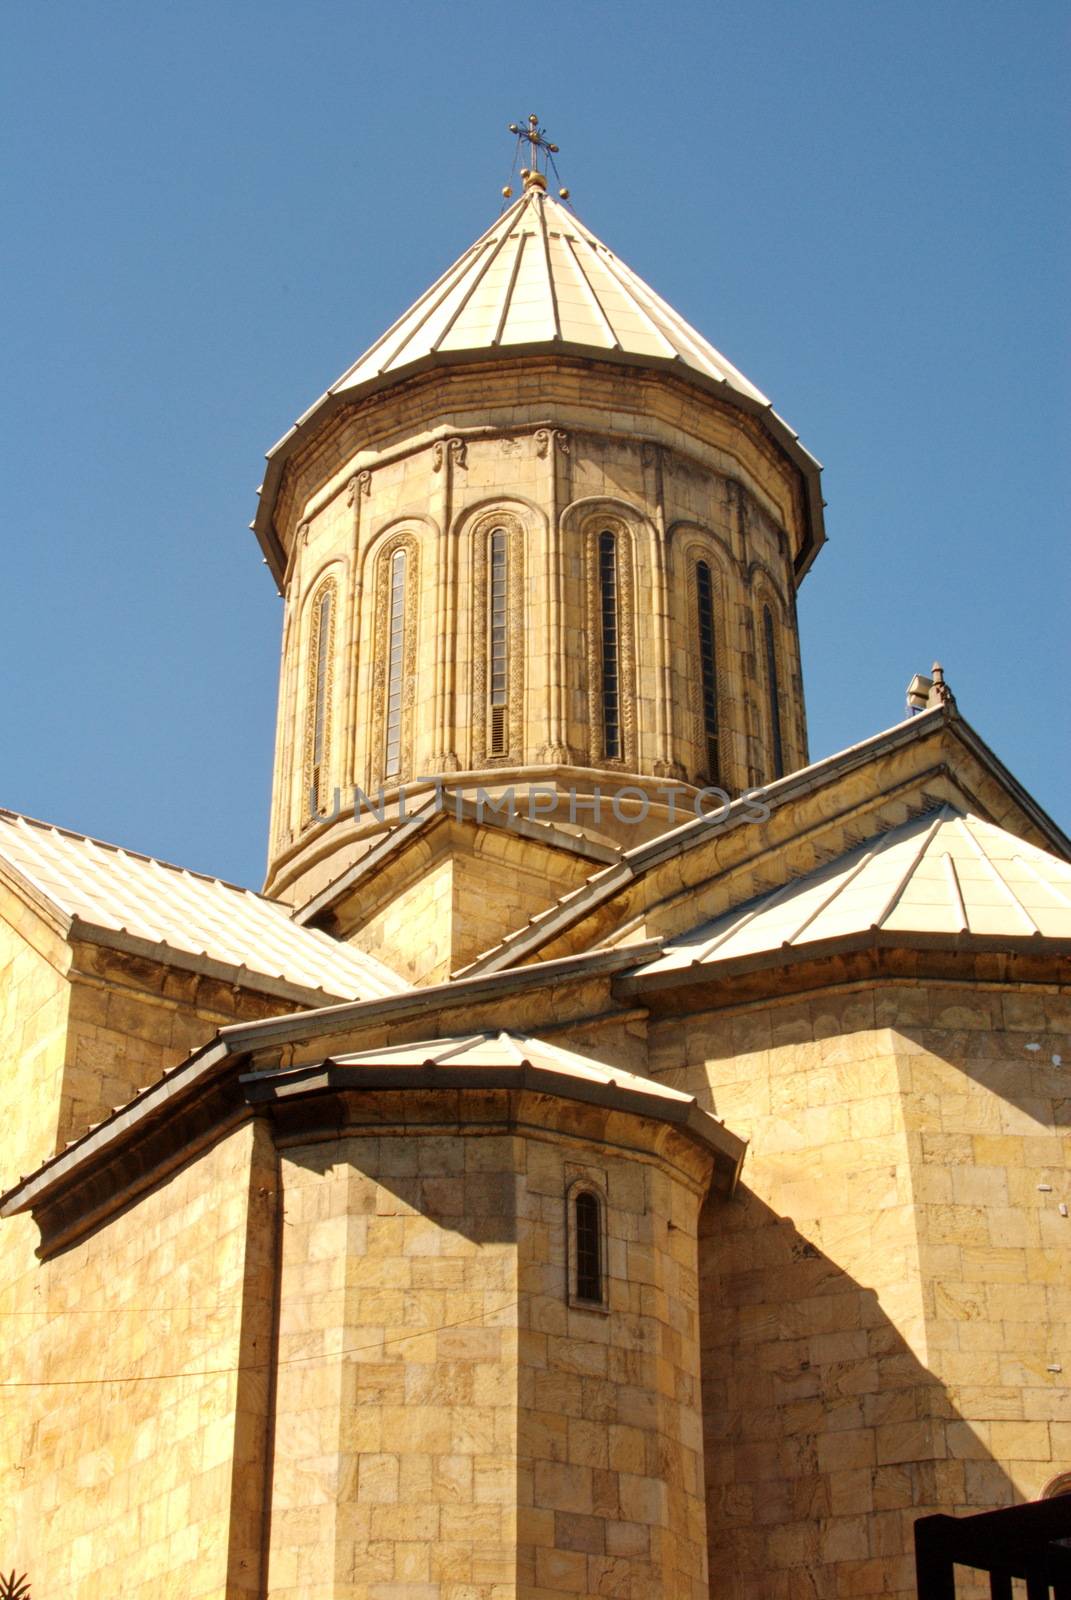 The Cathedral of Sioni or the Cathedral of the Assumption of the Virgin in the old city of Tbilisi, on the banks of the Kura River.